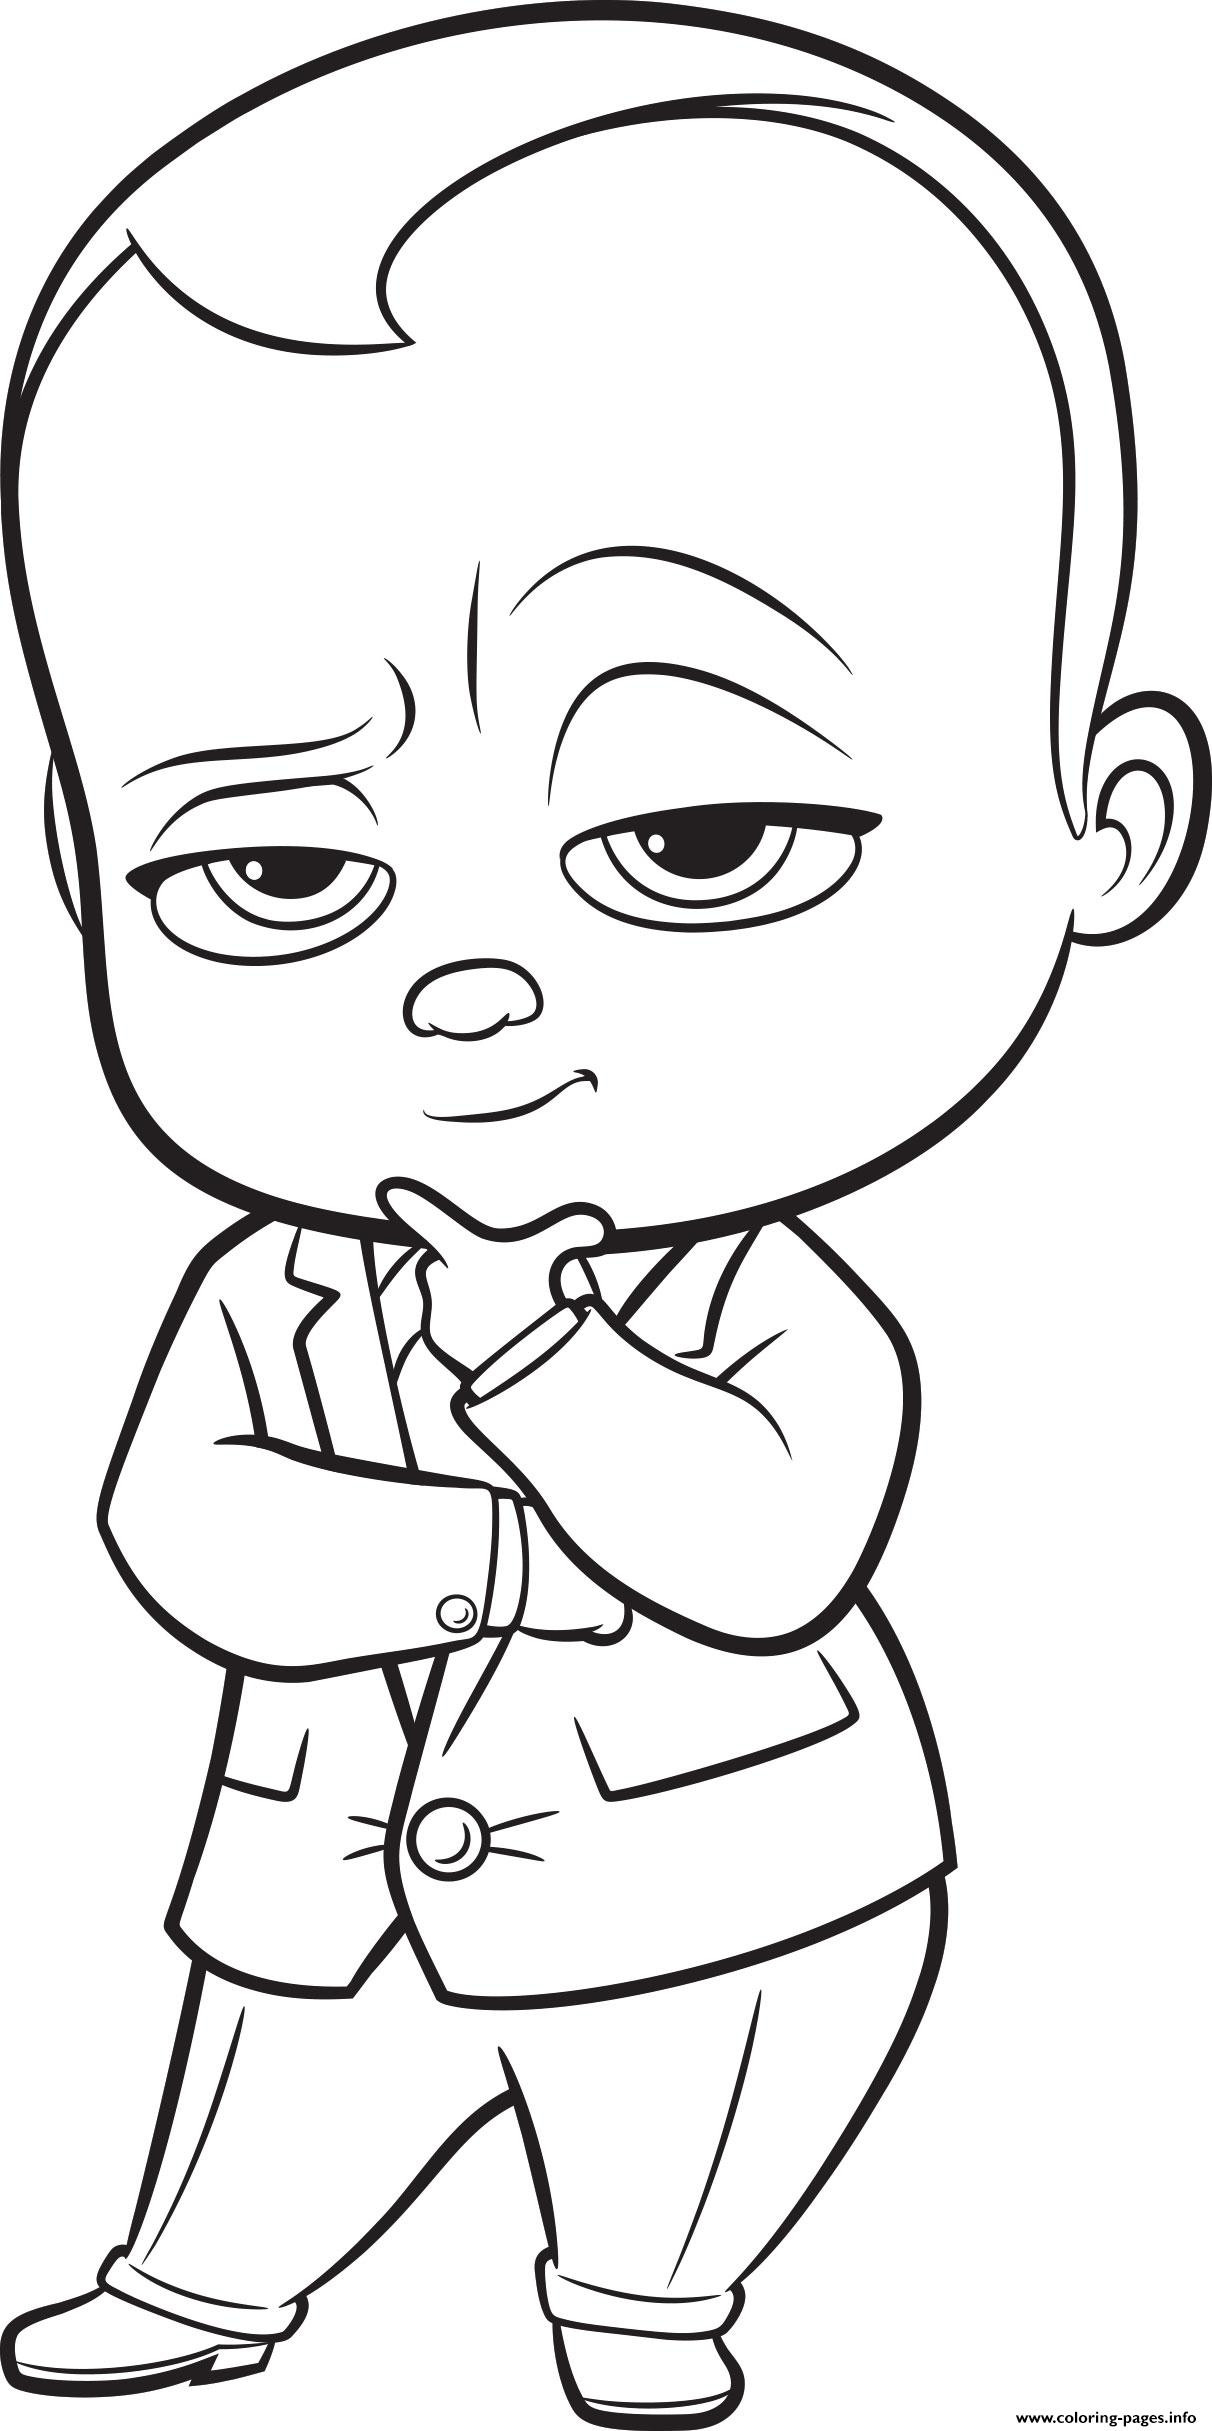 Bitty Baby Coloring Pages at GetColorings.com | Free ...